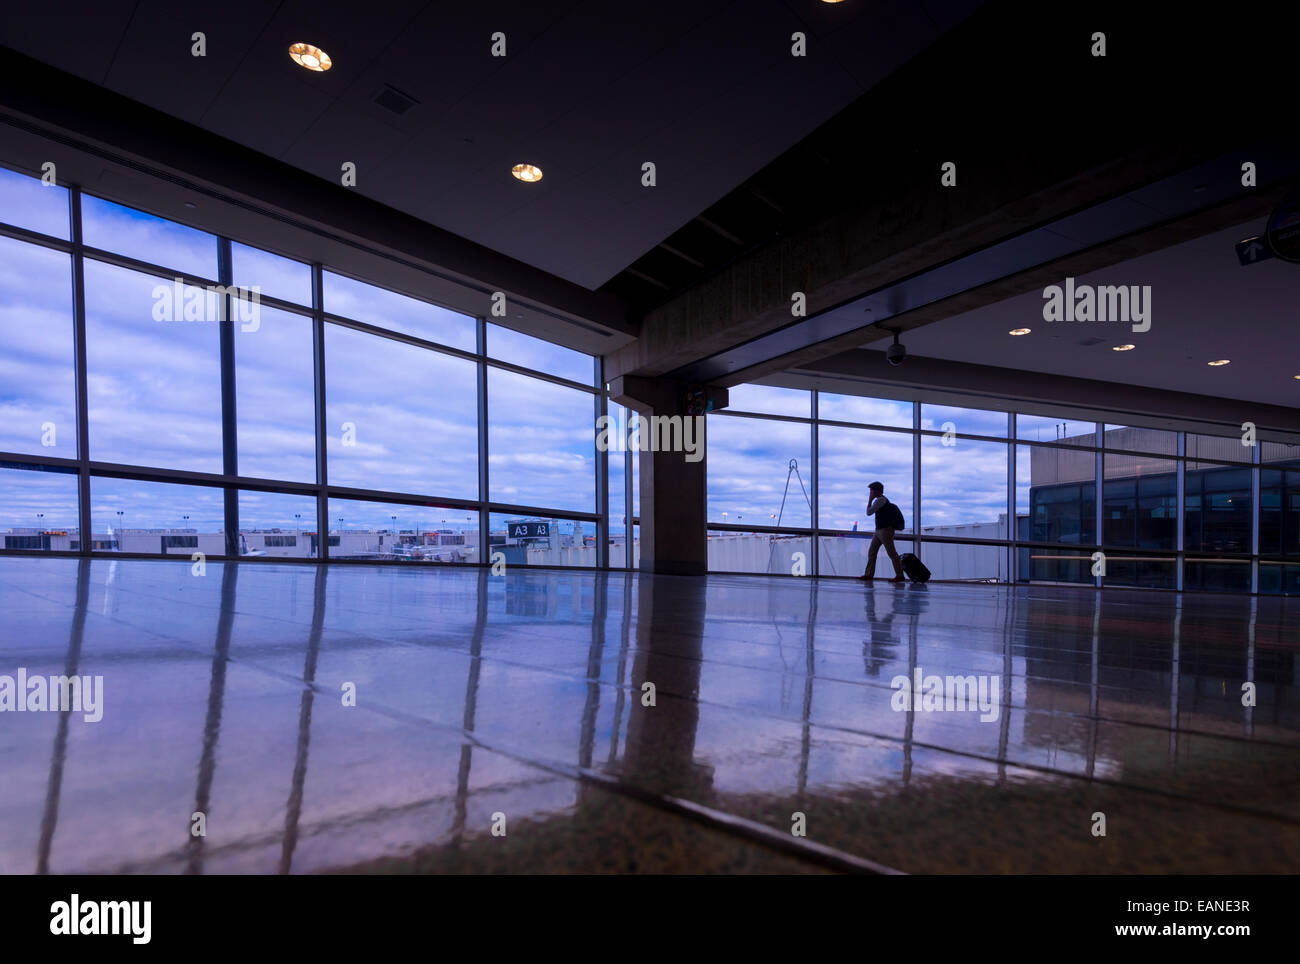 Man Walking & Talking On Cell Phone At Airport Banque D'Images